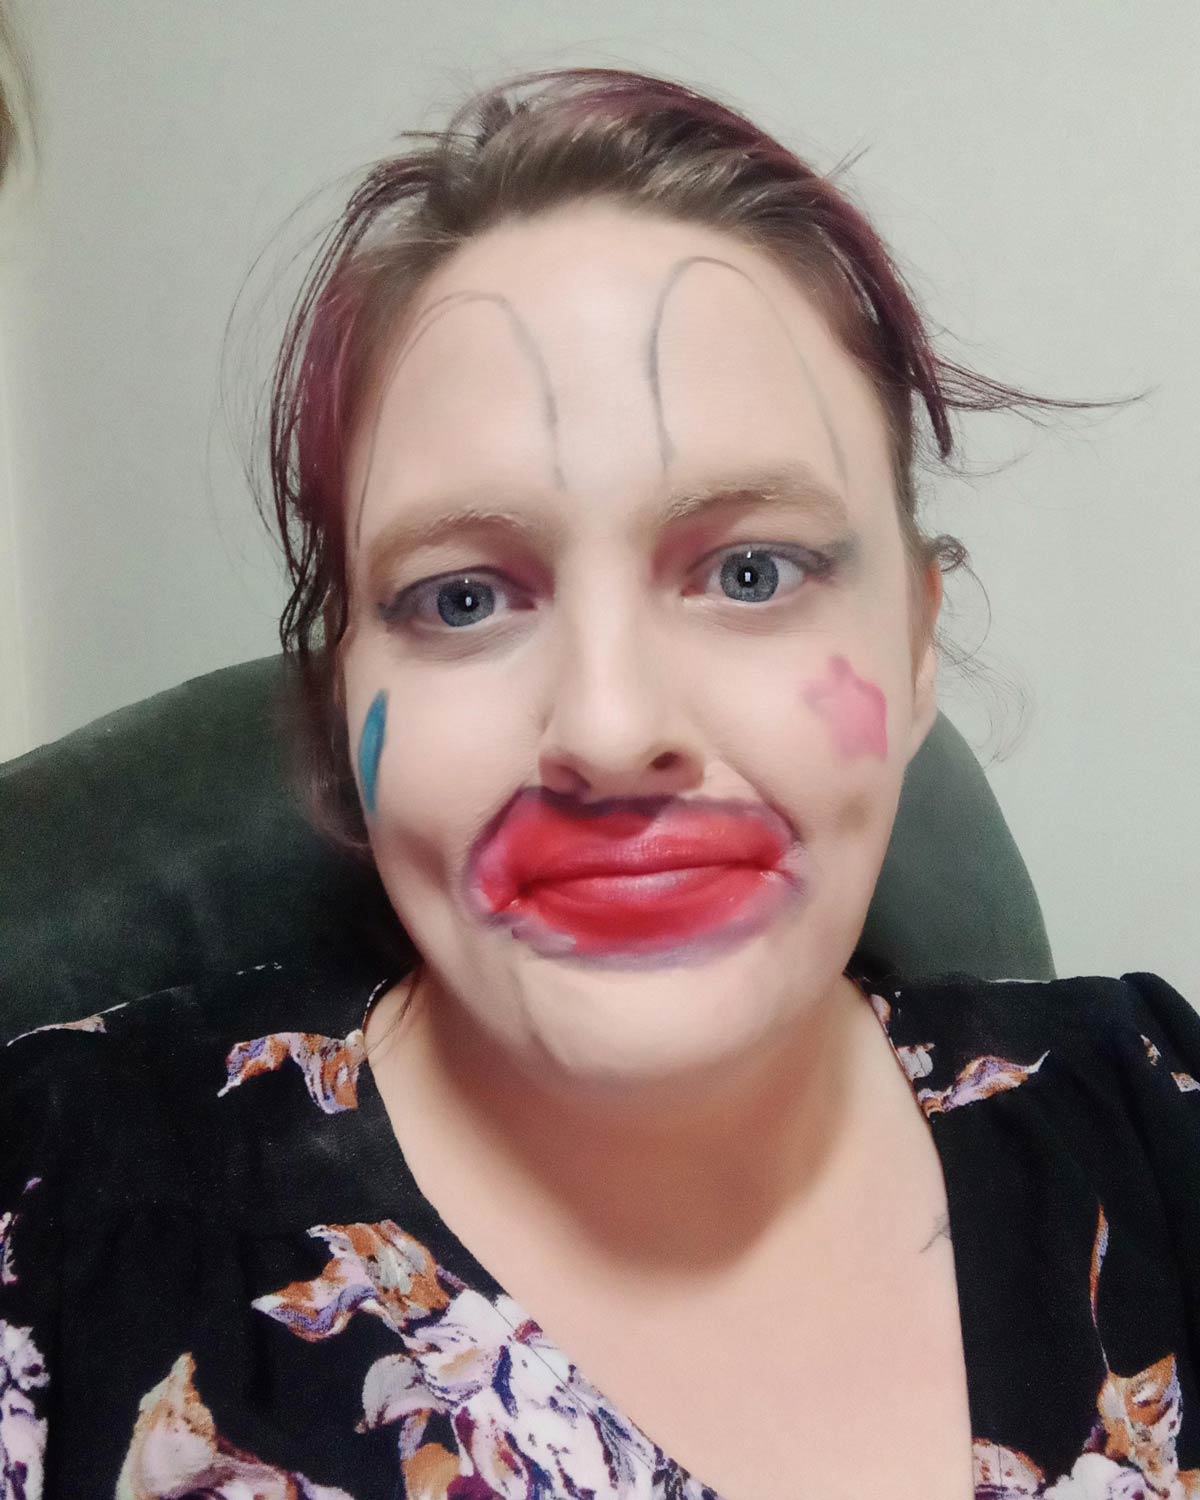 My daughter wanted to practice her make up skills